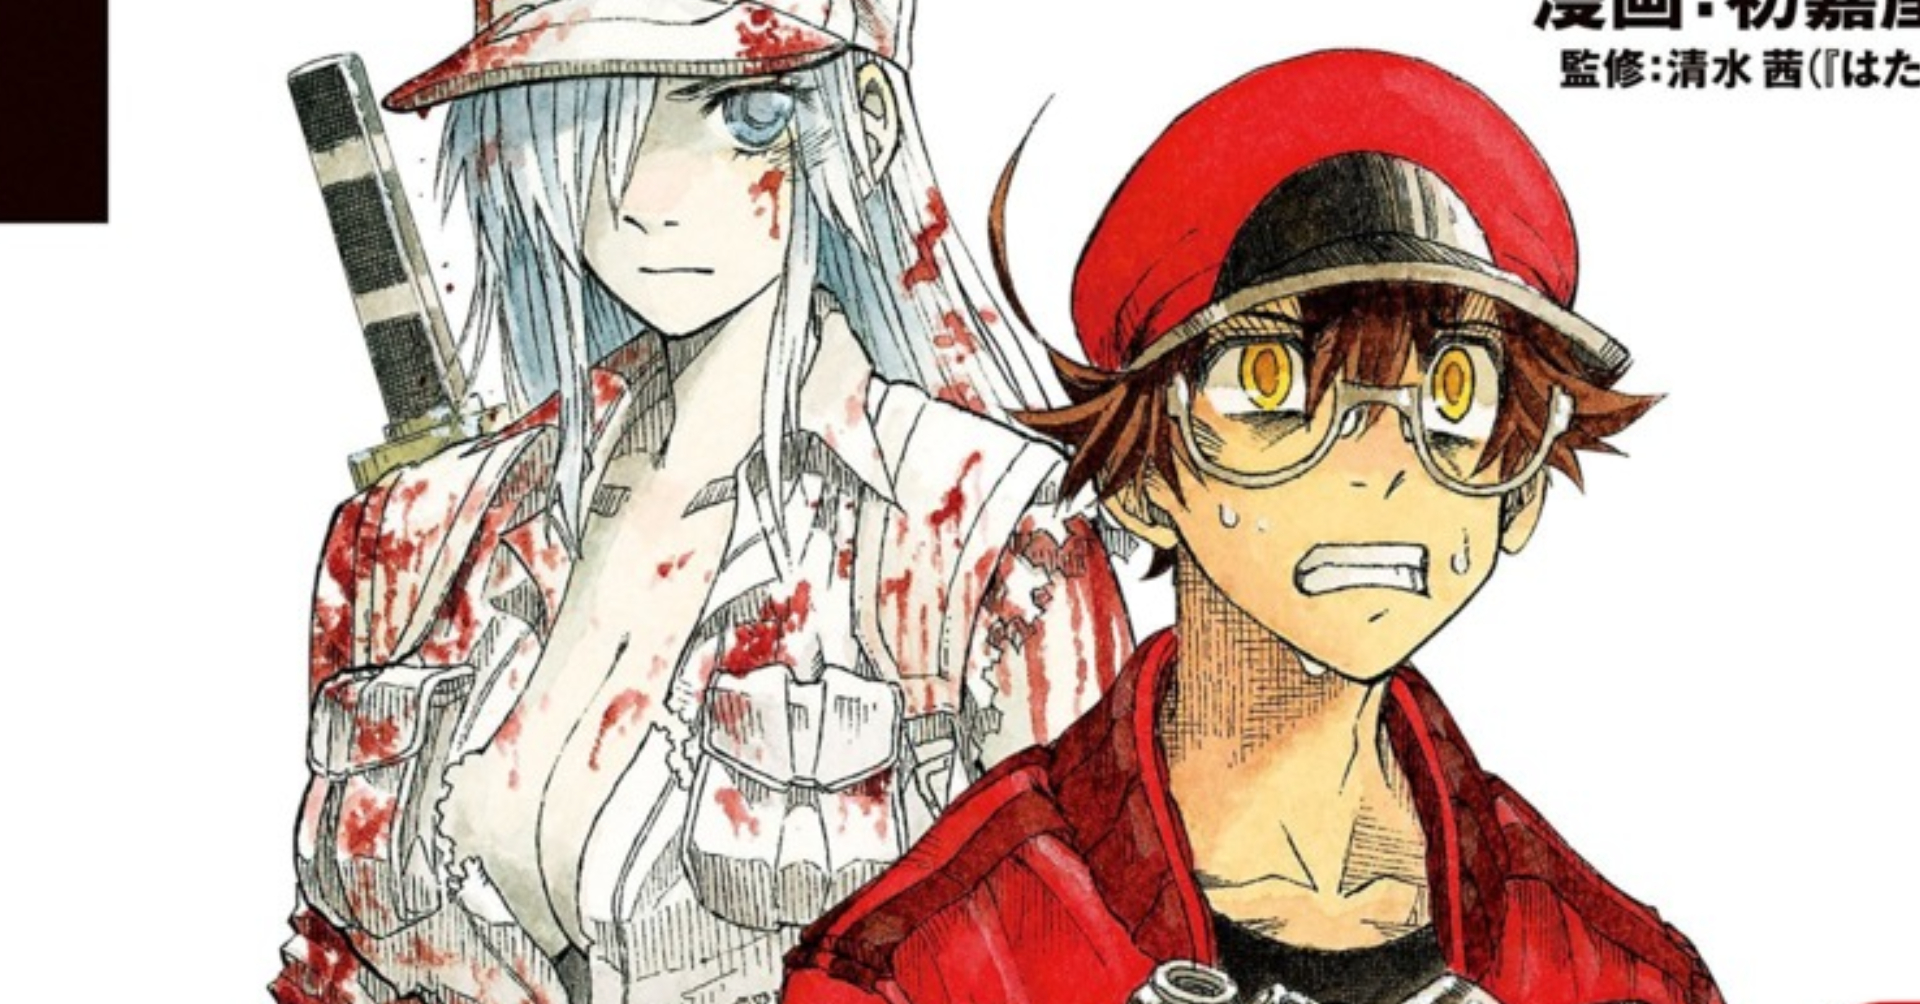 Cells at Work!! Theatrical Anime to Run With New Platelet Anime Short -  News - Anime News Network